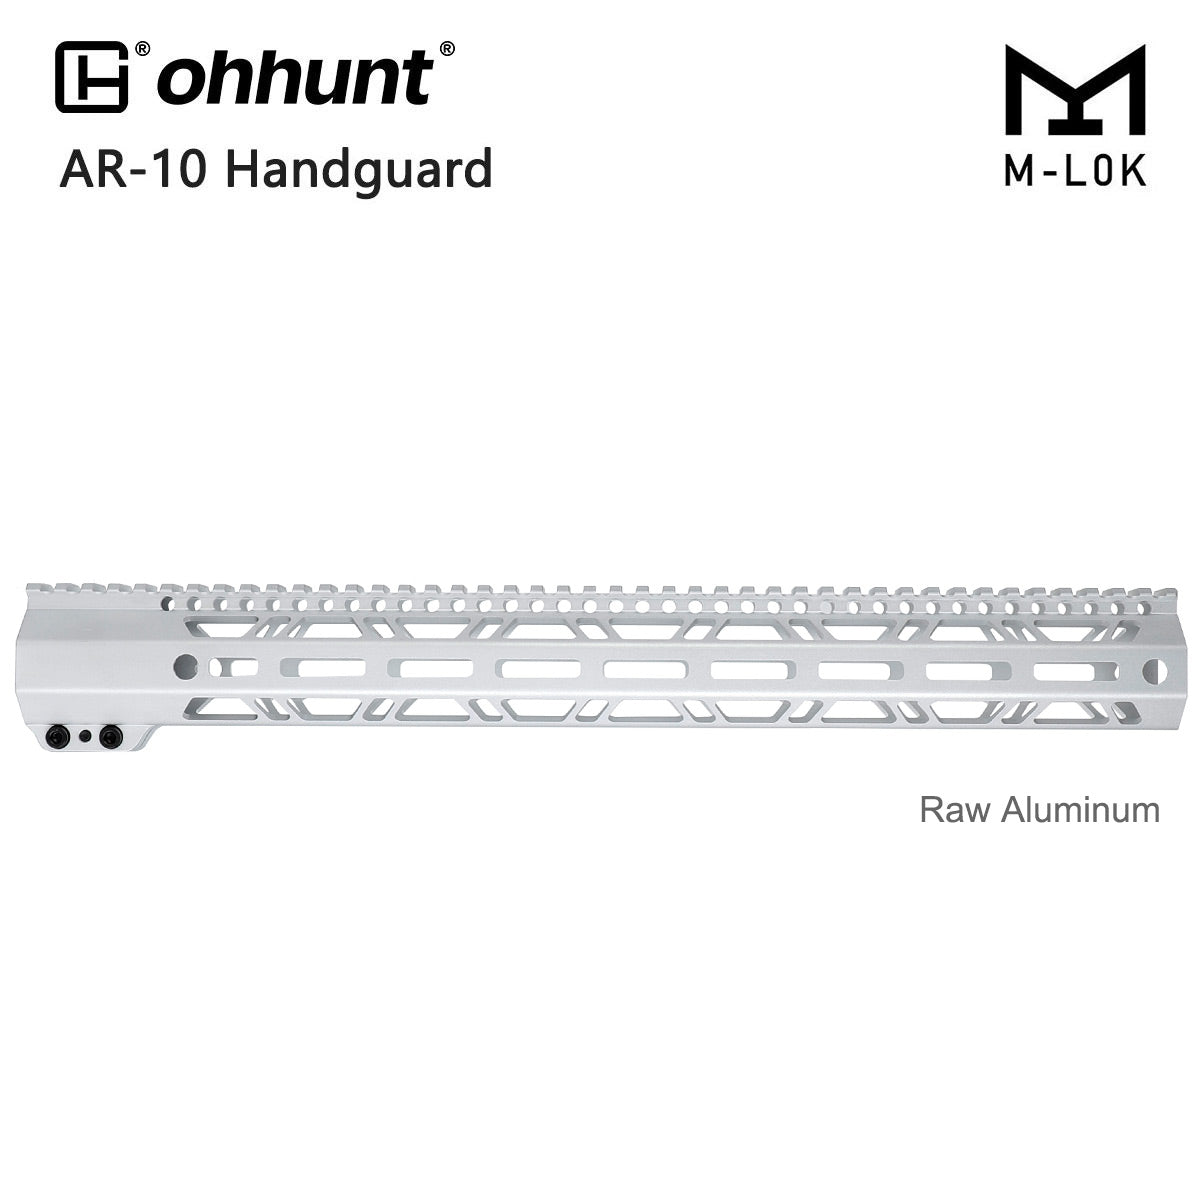 Unbranded Raw AR10 Handguard Unpainted Silver Color - 17 inch